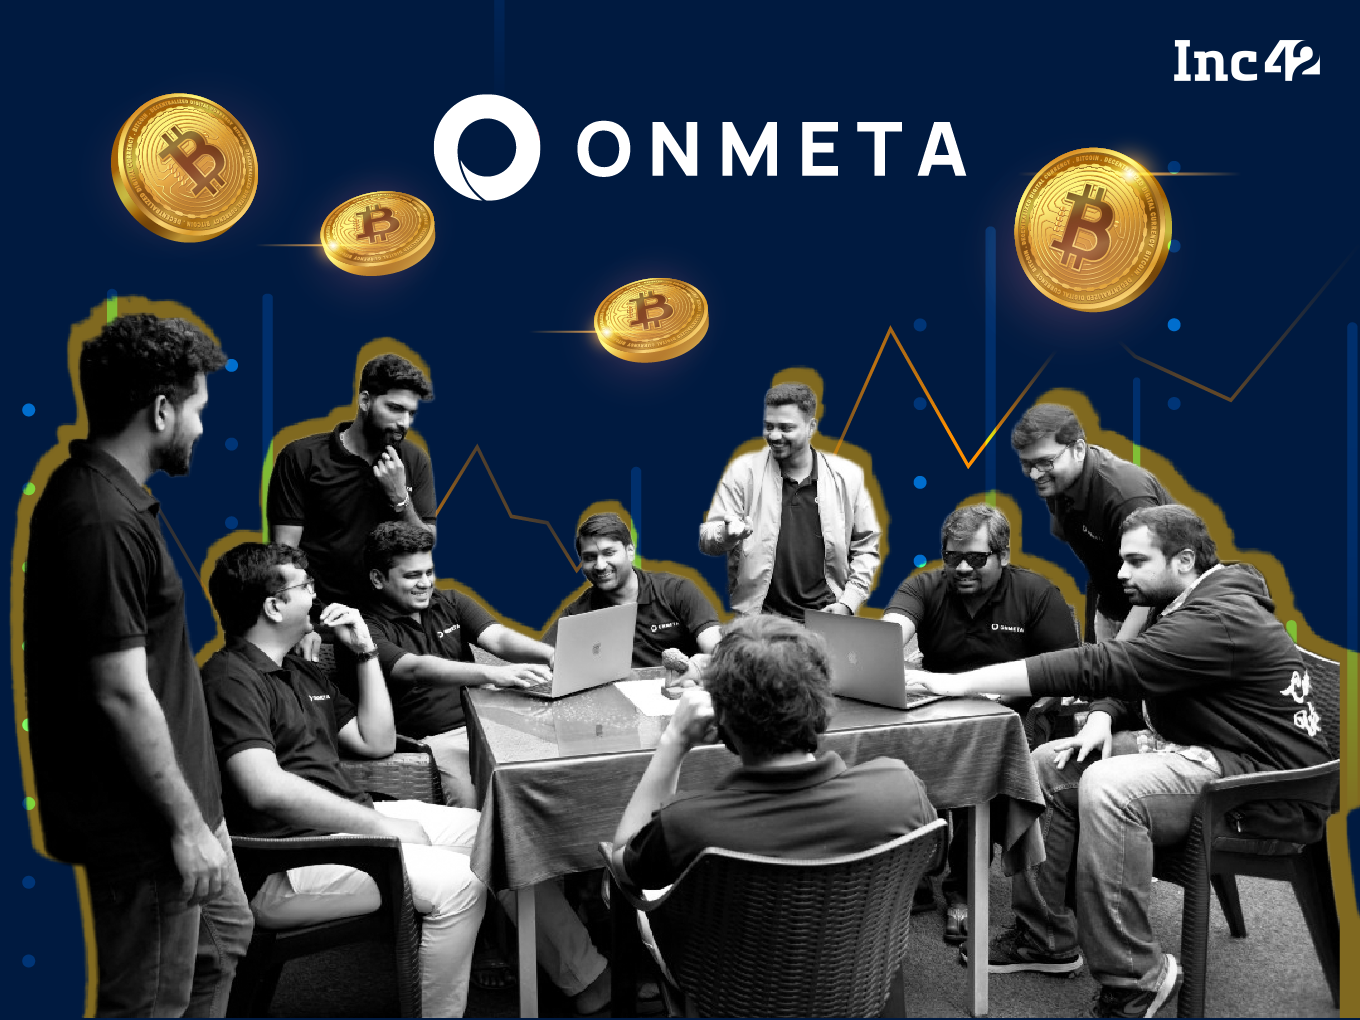 How Onmeta is helping dApps reach more users by simplifying crypto transactions